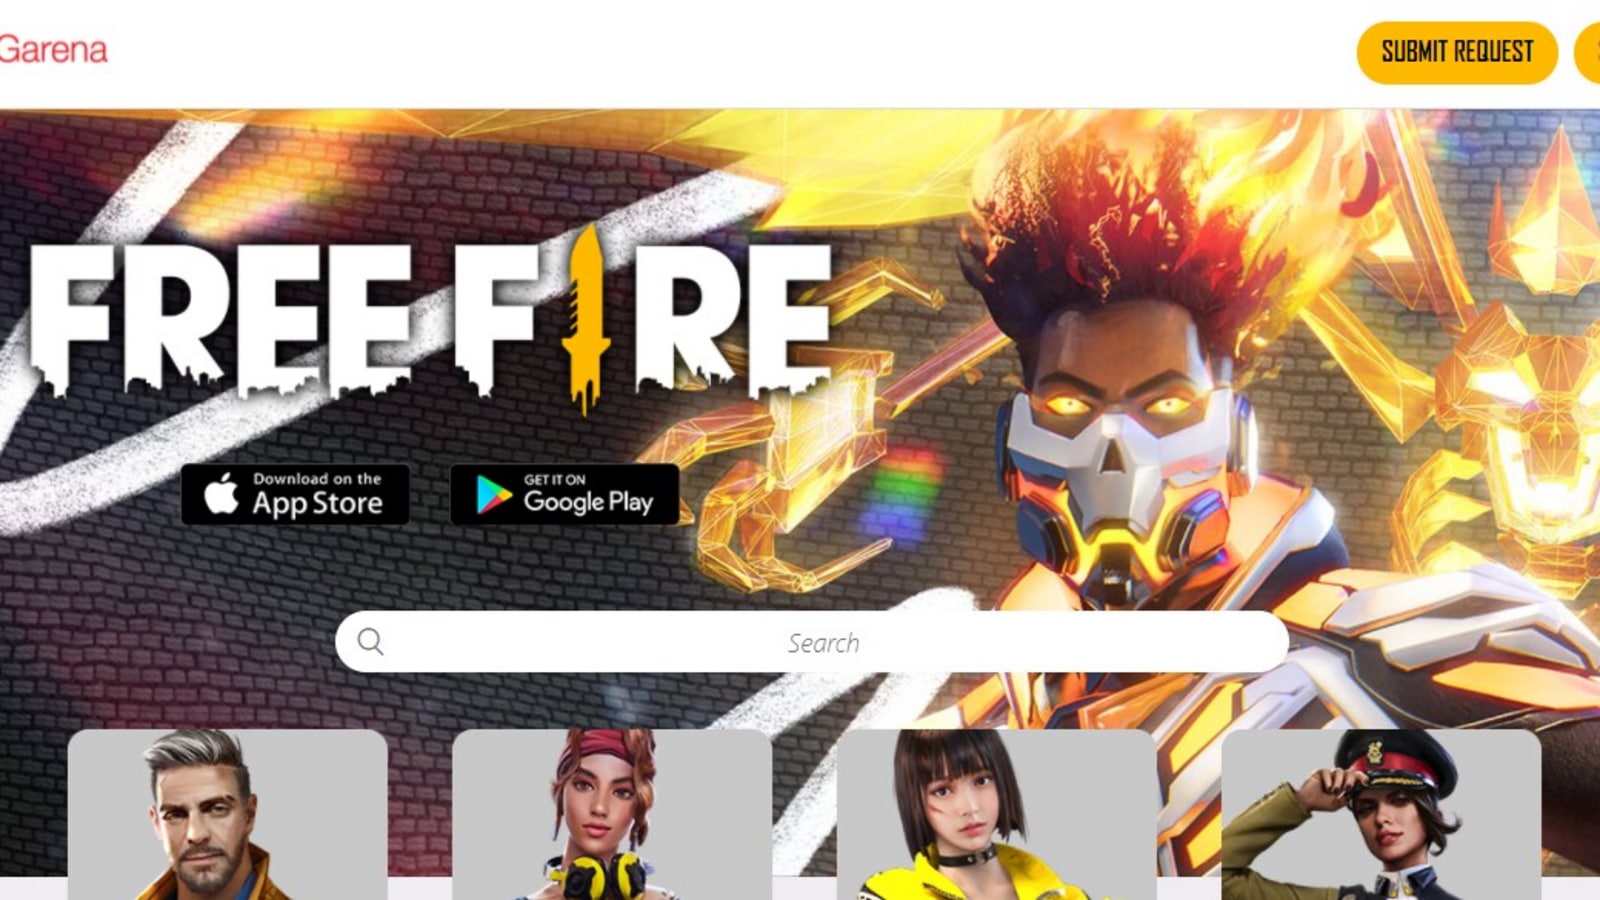 Free Fire Max Help Centre: How to Contact Garena Free Fire Help